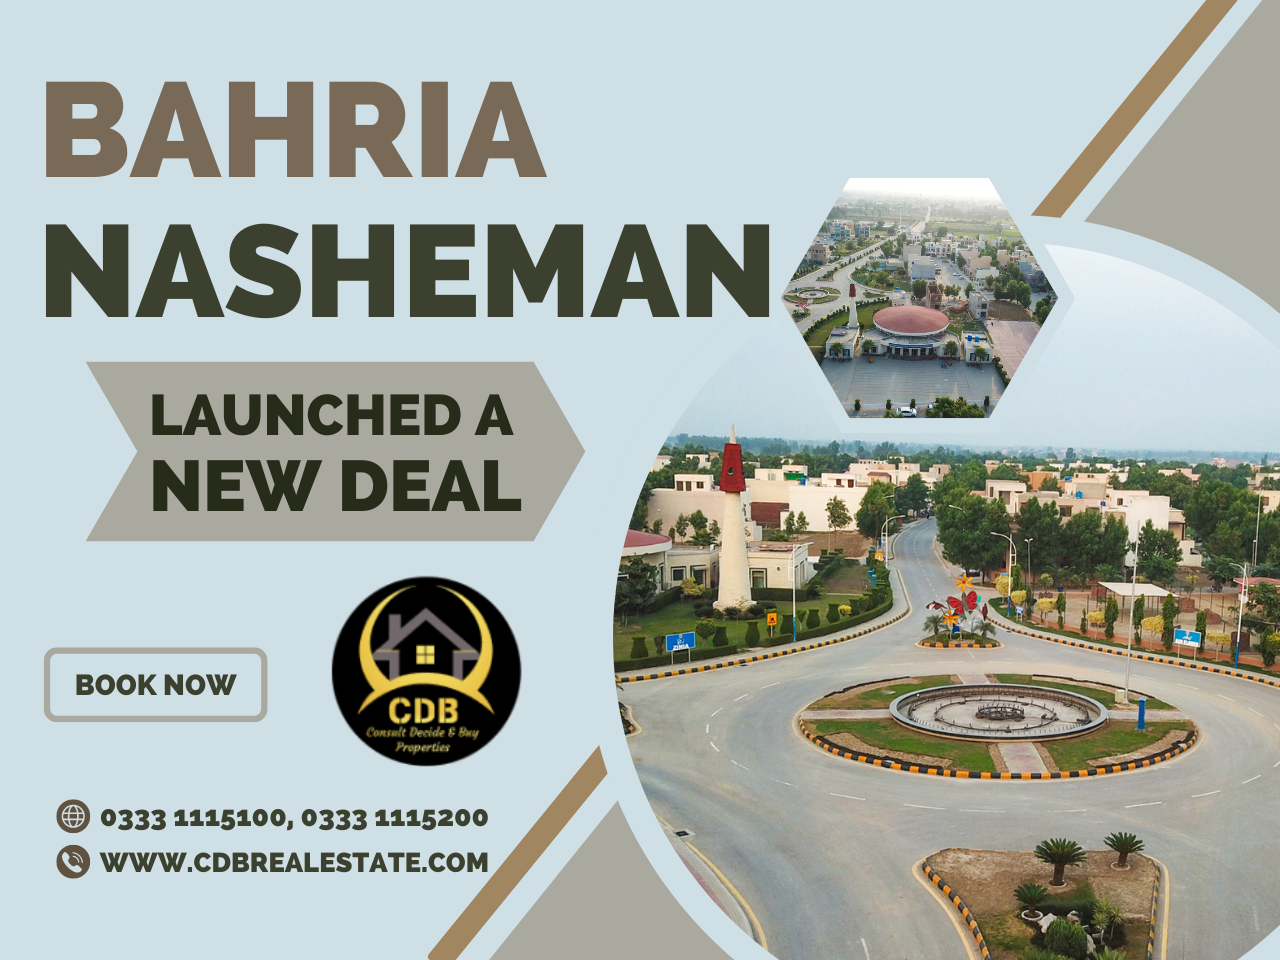 Bahria Nasheman Launched A New Deal